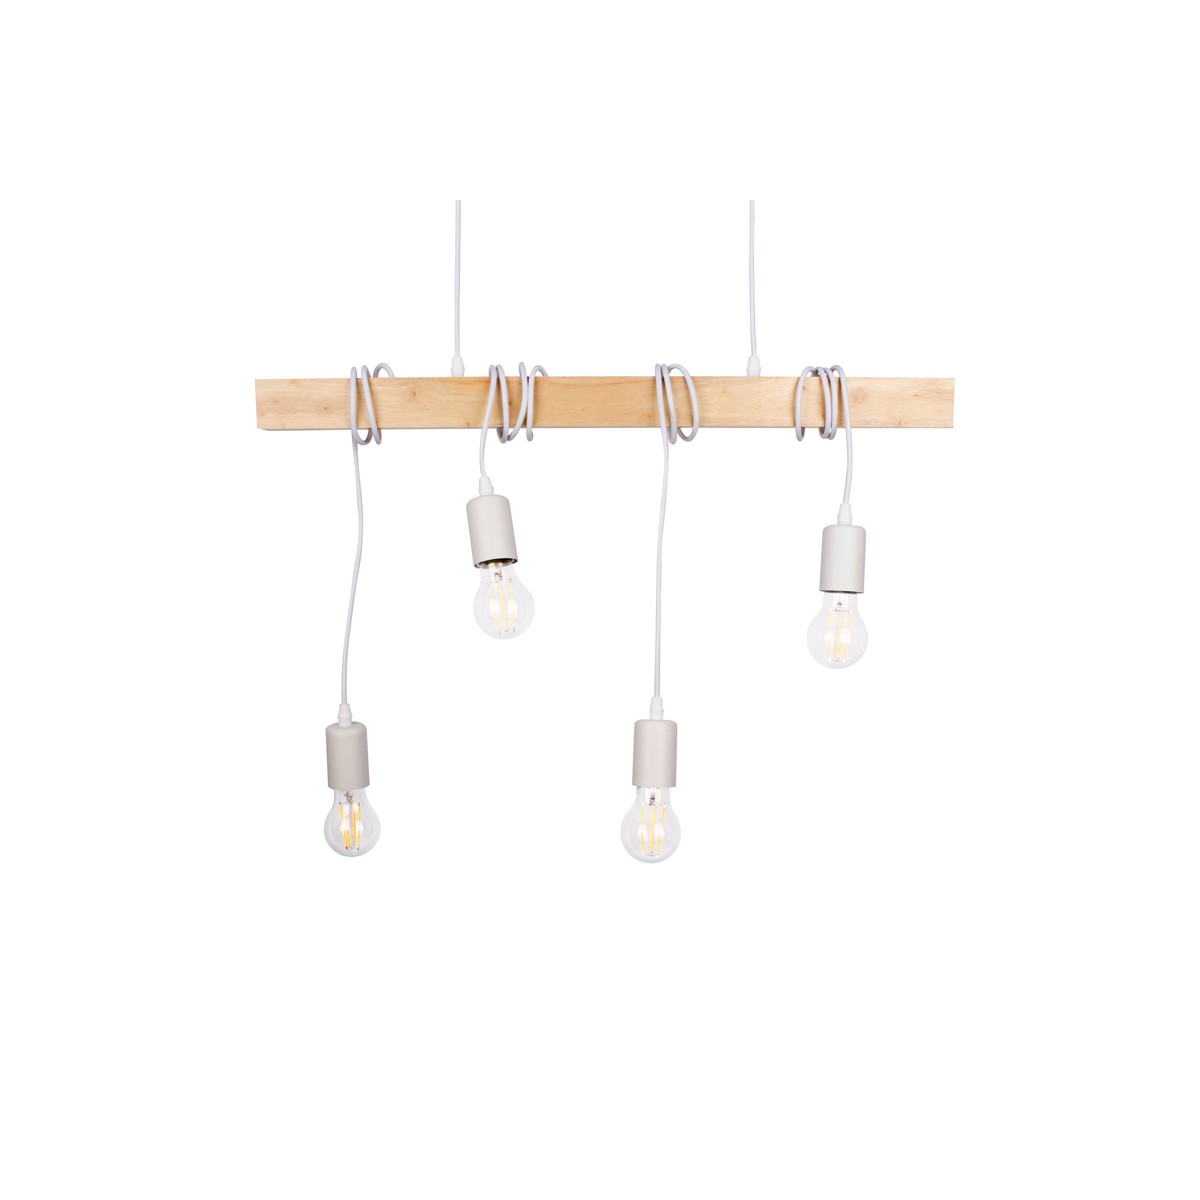 Wooden pendant lamp "Otto" with white vintage and rustic style